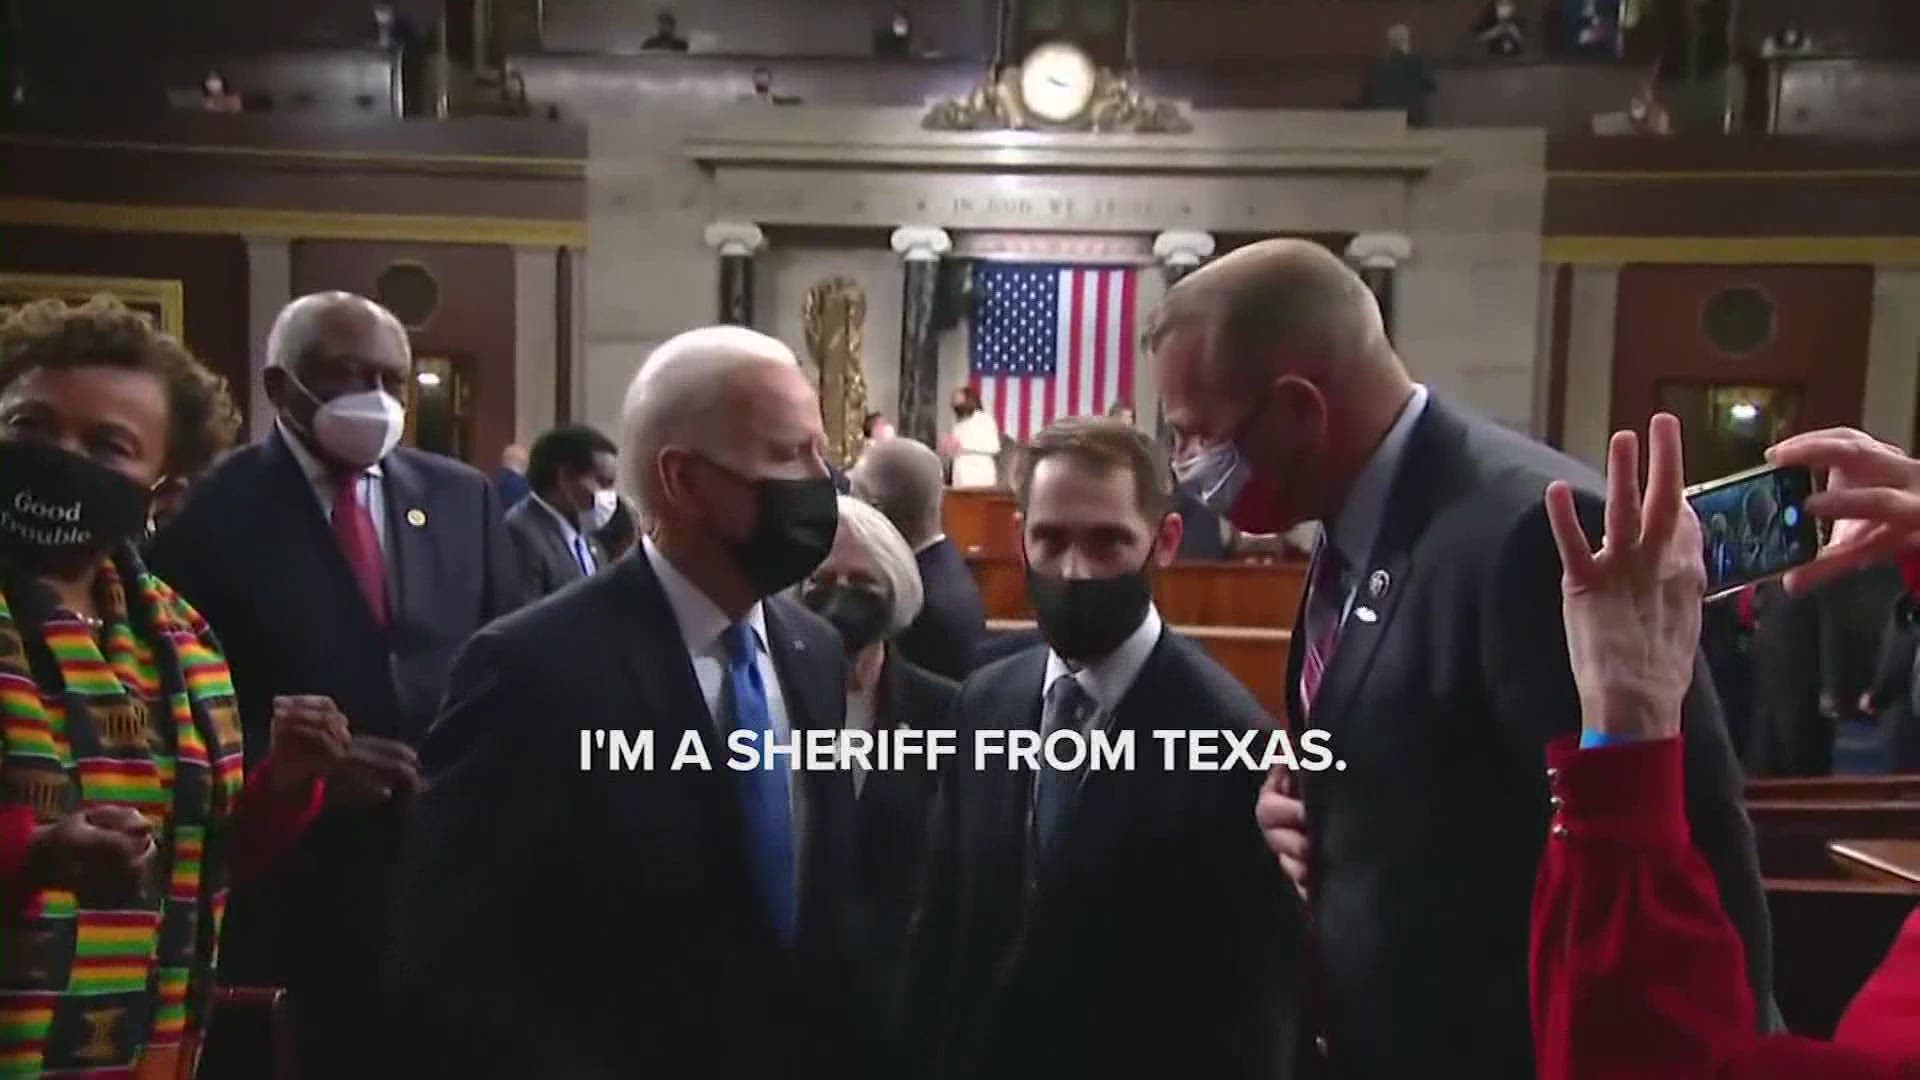 The former Fort Bend County Sheriff says his experience can benefit the Biden administration in criminal justice reform.